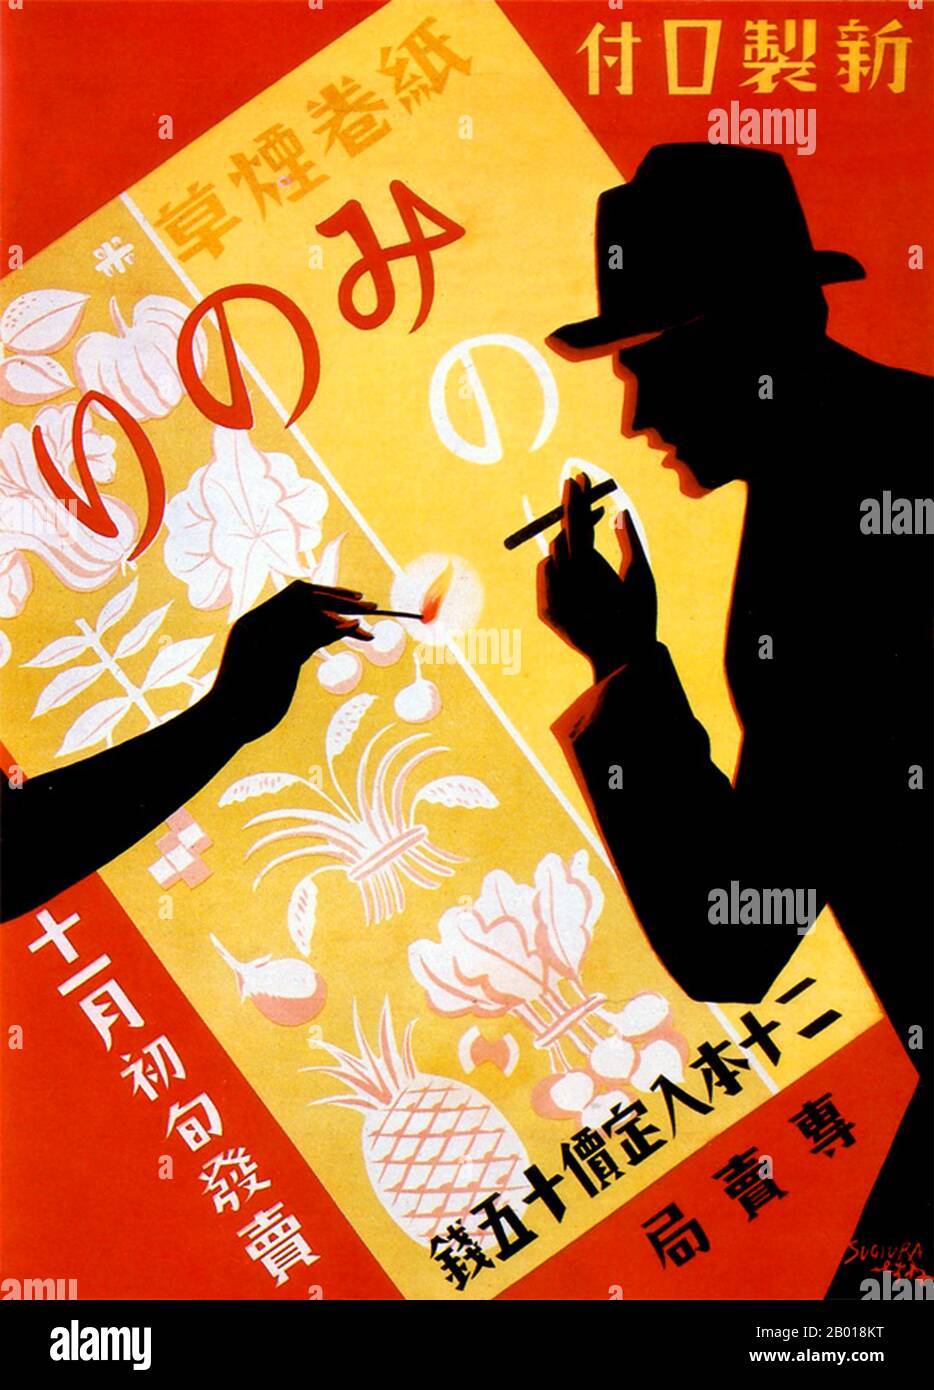 Japan: Advertising poster for Minori Cigarettes, c. 1930.  1930s style silhouette advertisement for Minori cigarettes - a man in a homburg hat gets a light from a silhouetted hand. Stock Photo